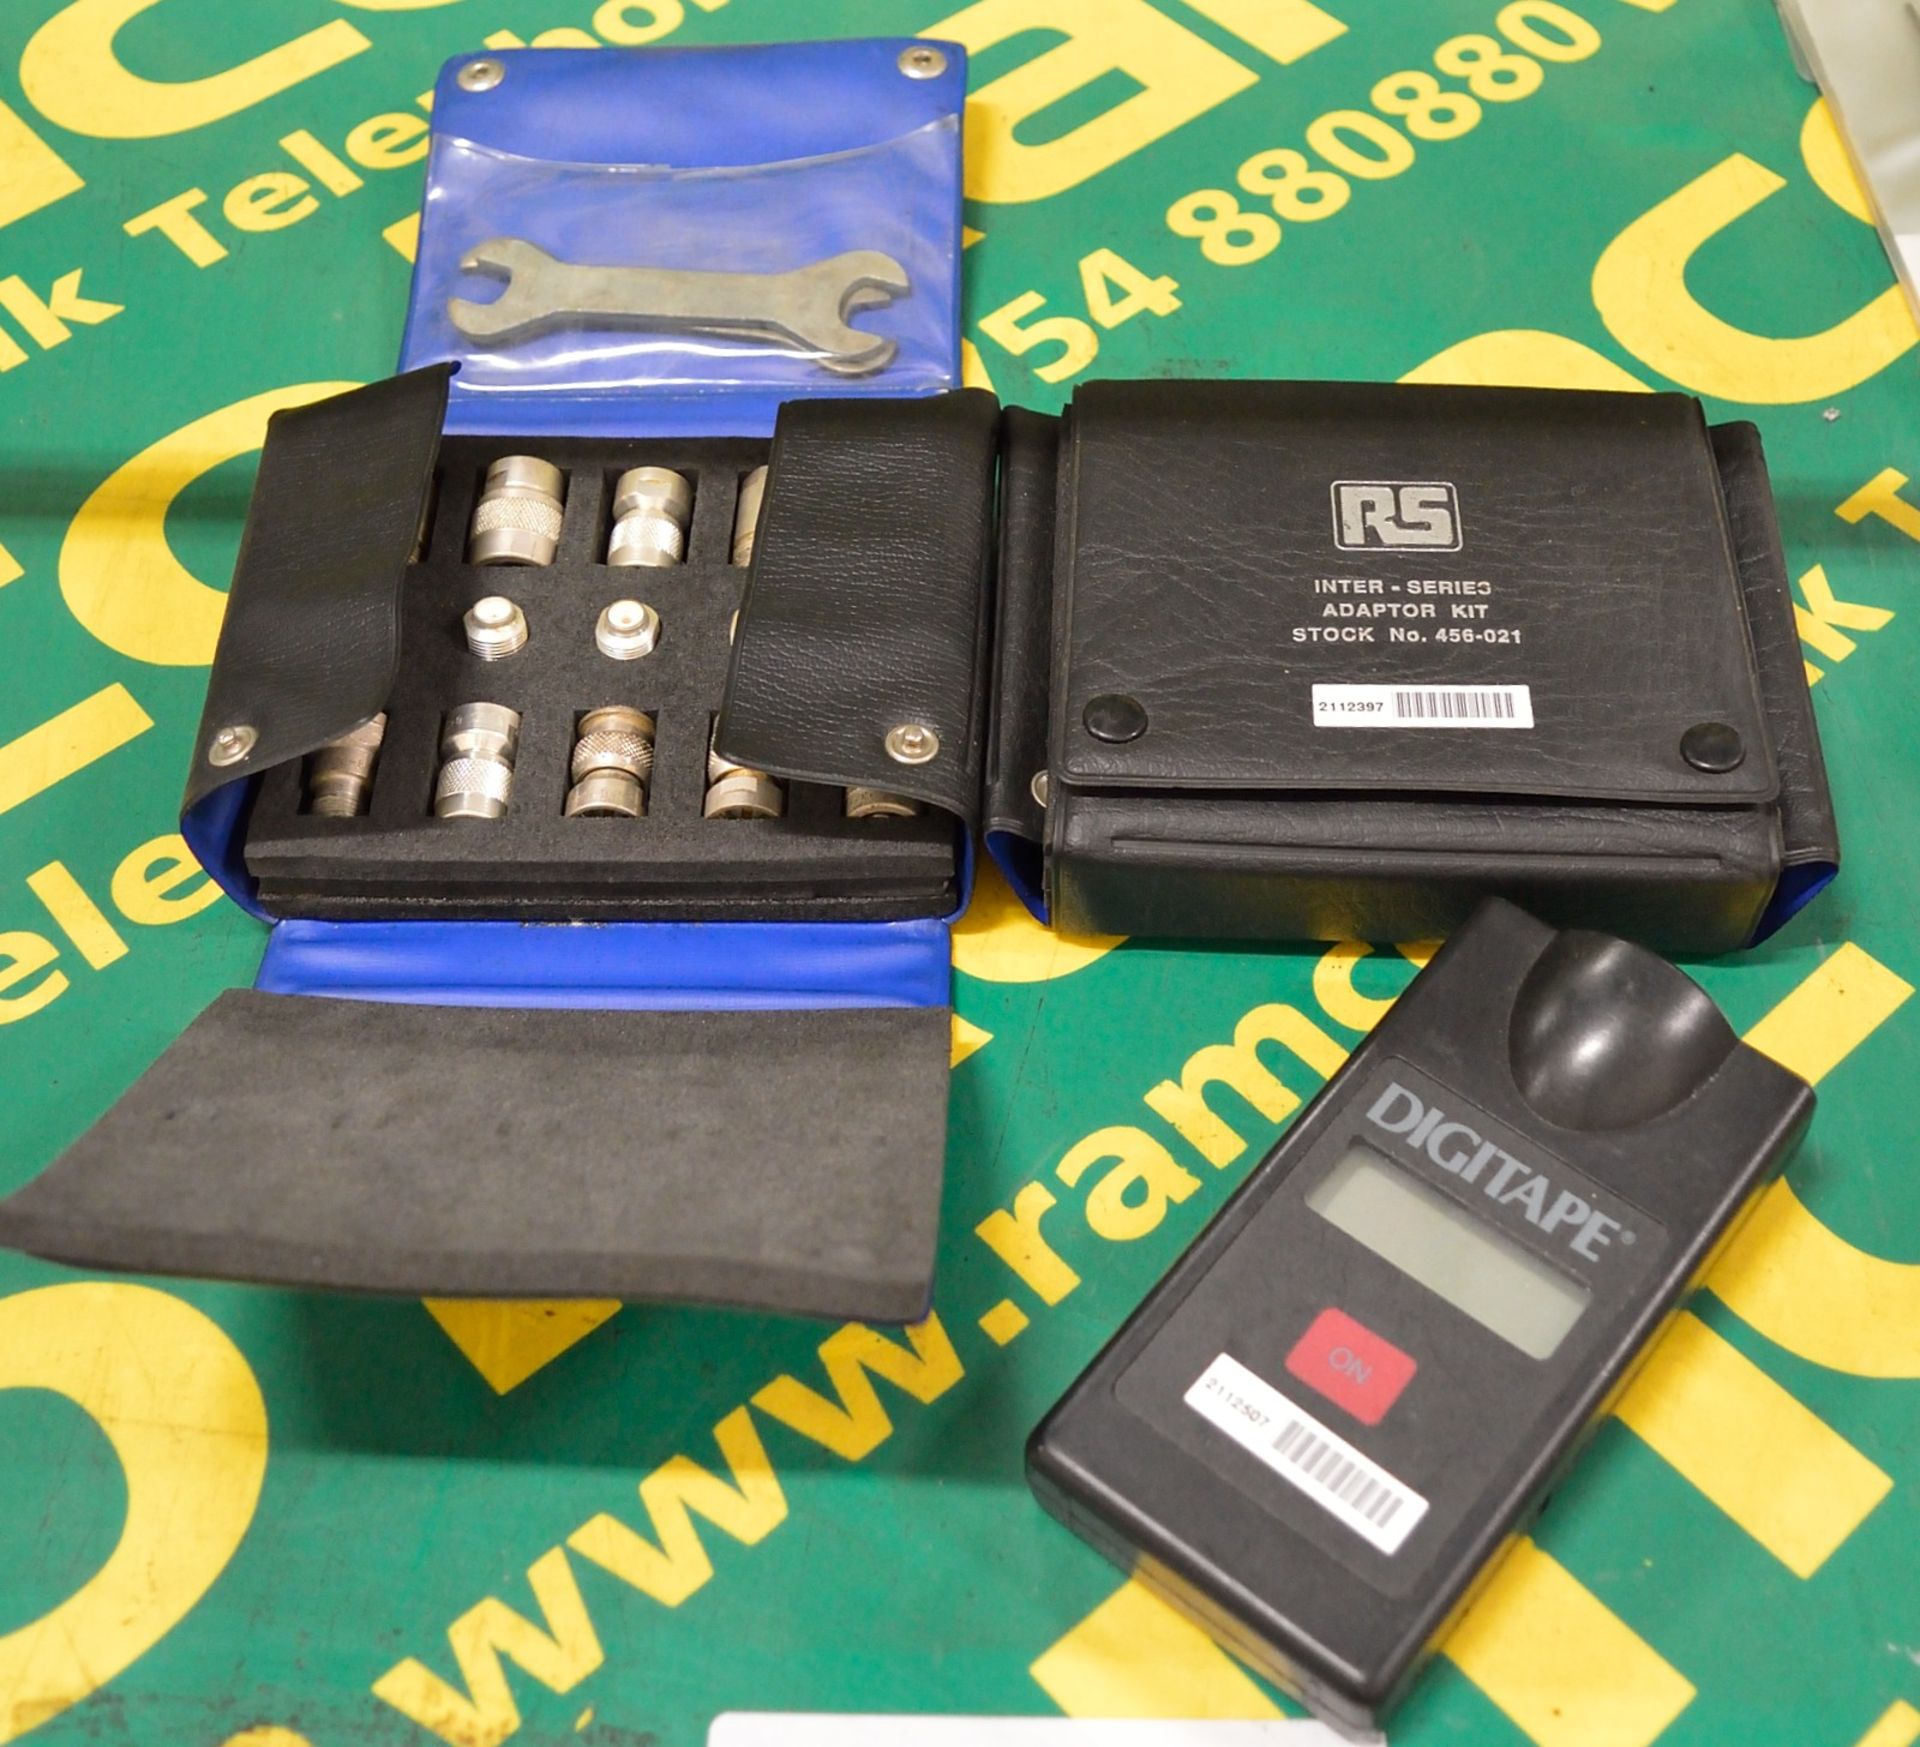 2x RS Inter Series Adaptor Kits 456-021. Digitape Measuring Device - Requires new battery.